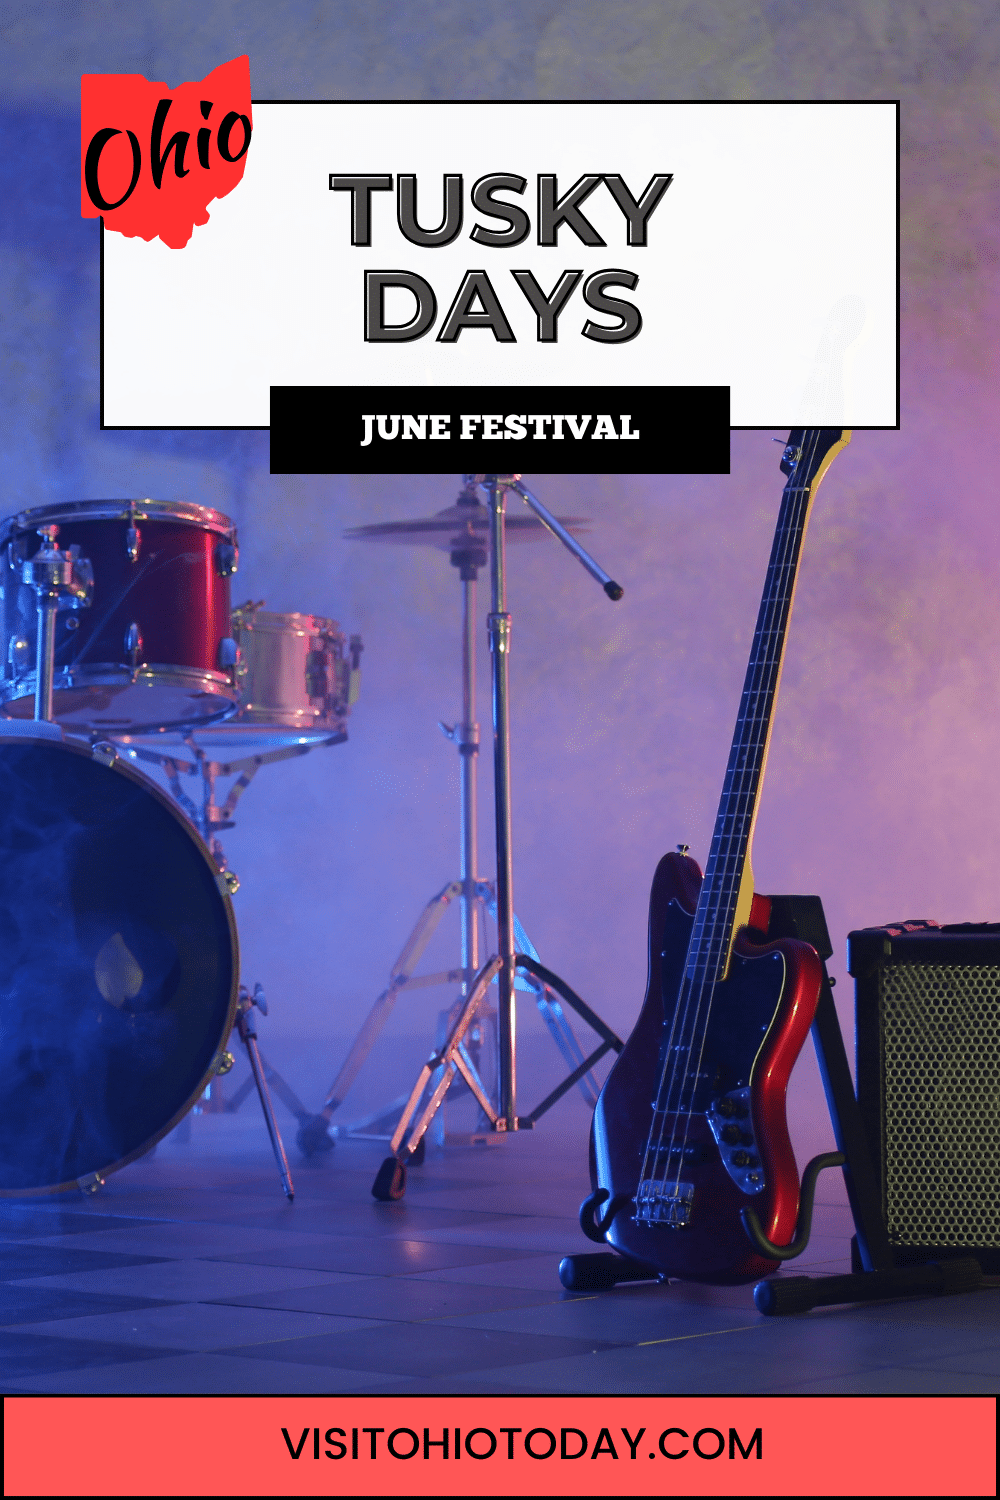 The Tusky Days Festival is a community event that takes place in Tuscarawas in late June.